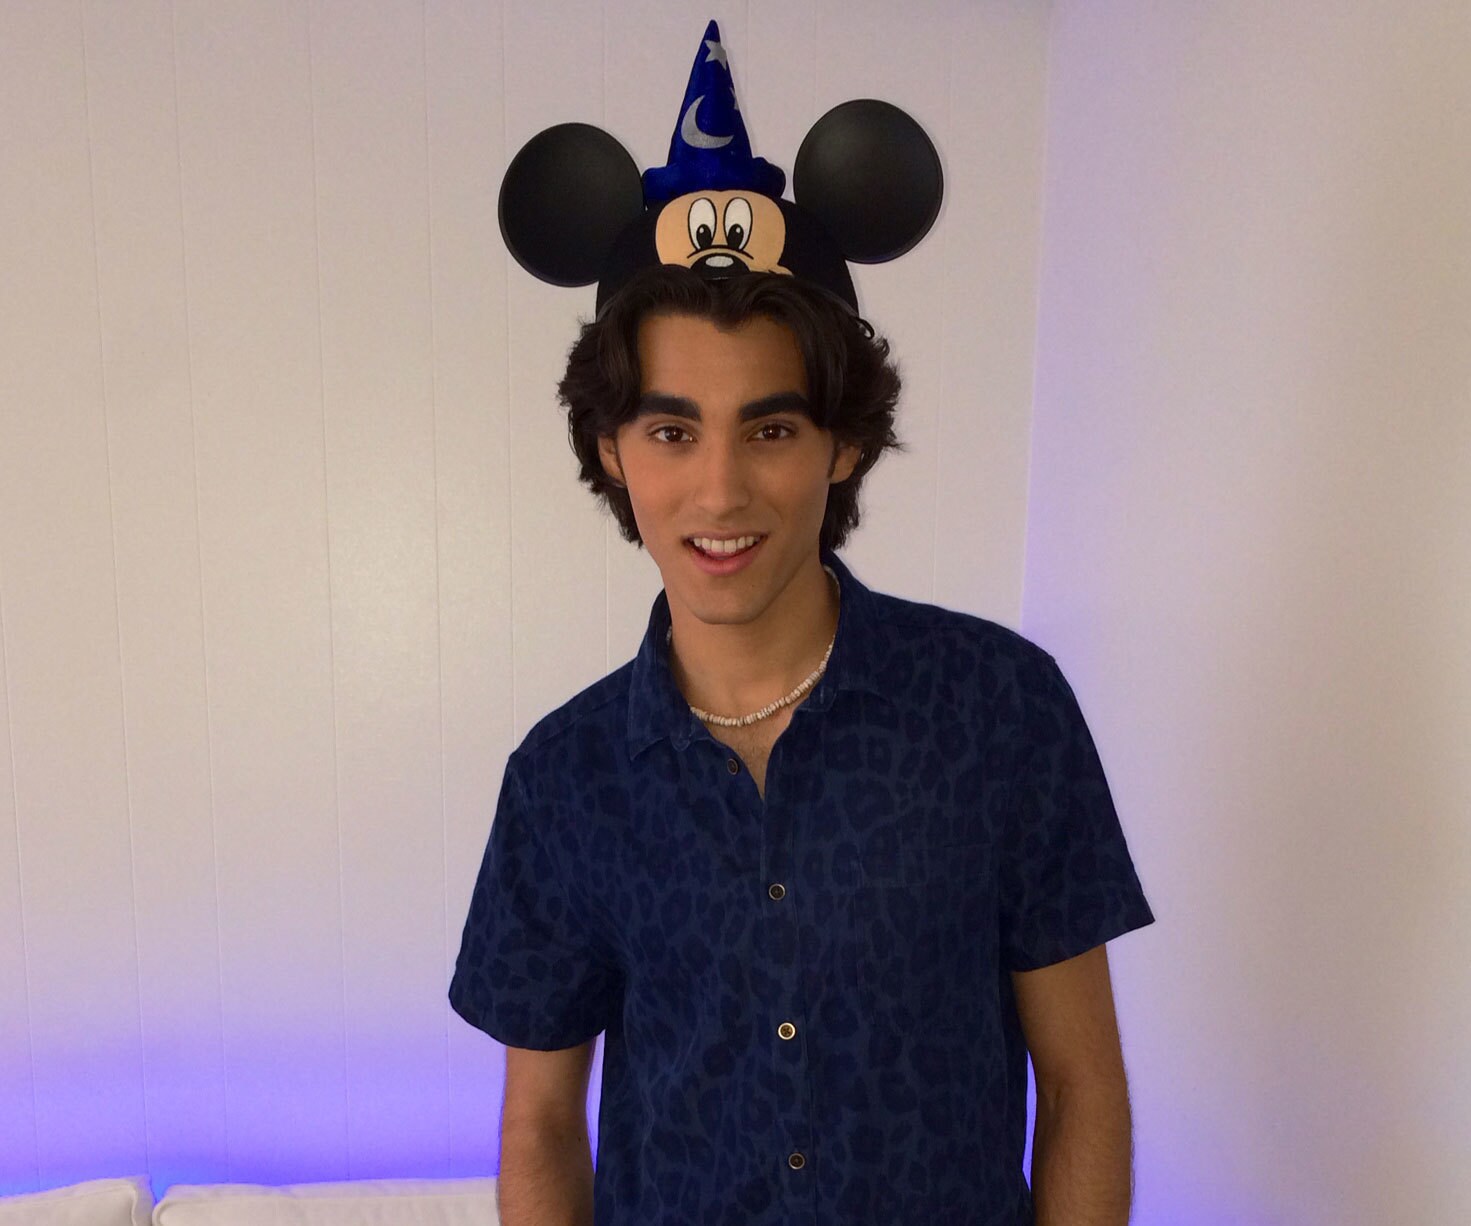 Blake Michael from Disney Channel's Dog With A Blog